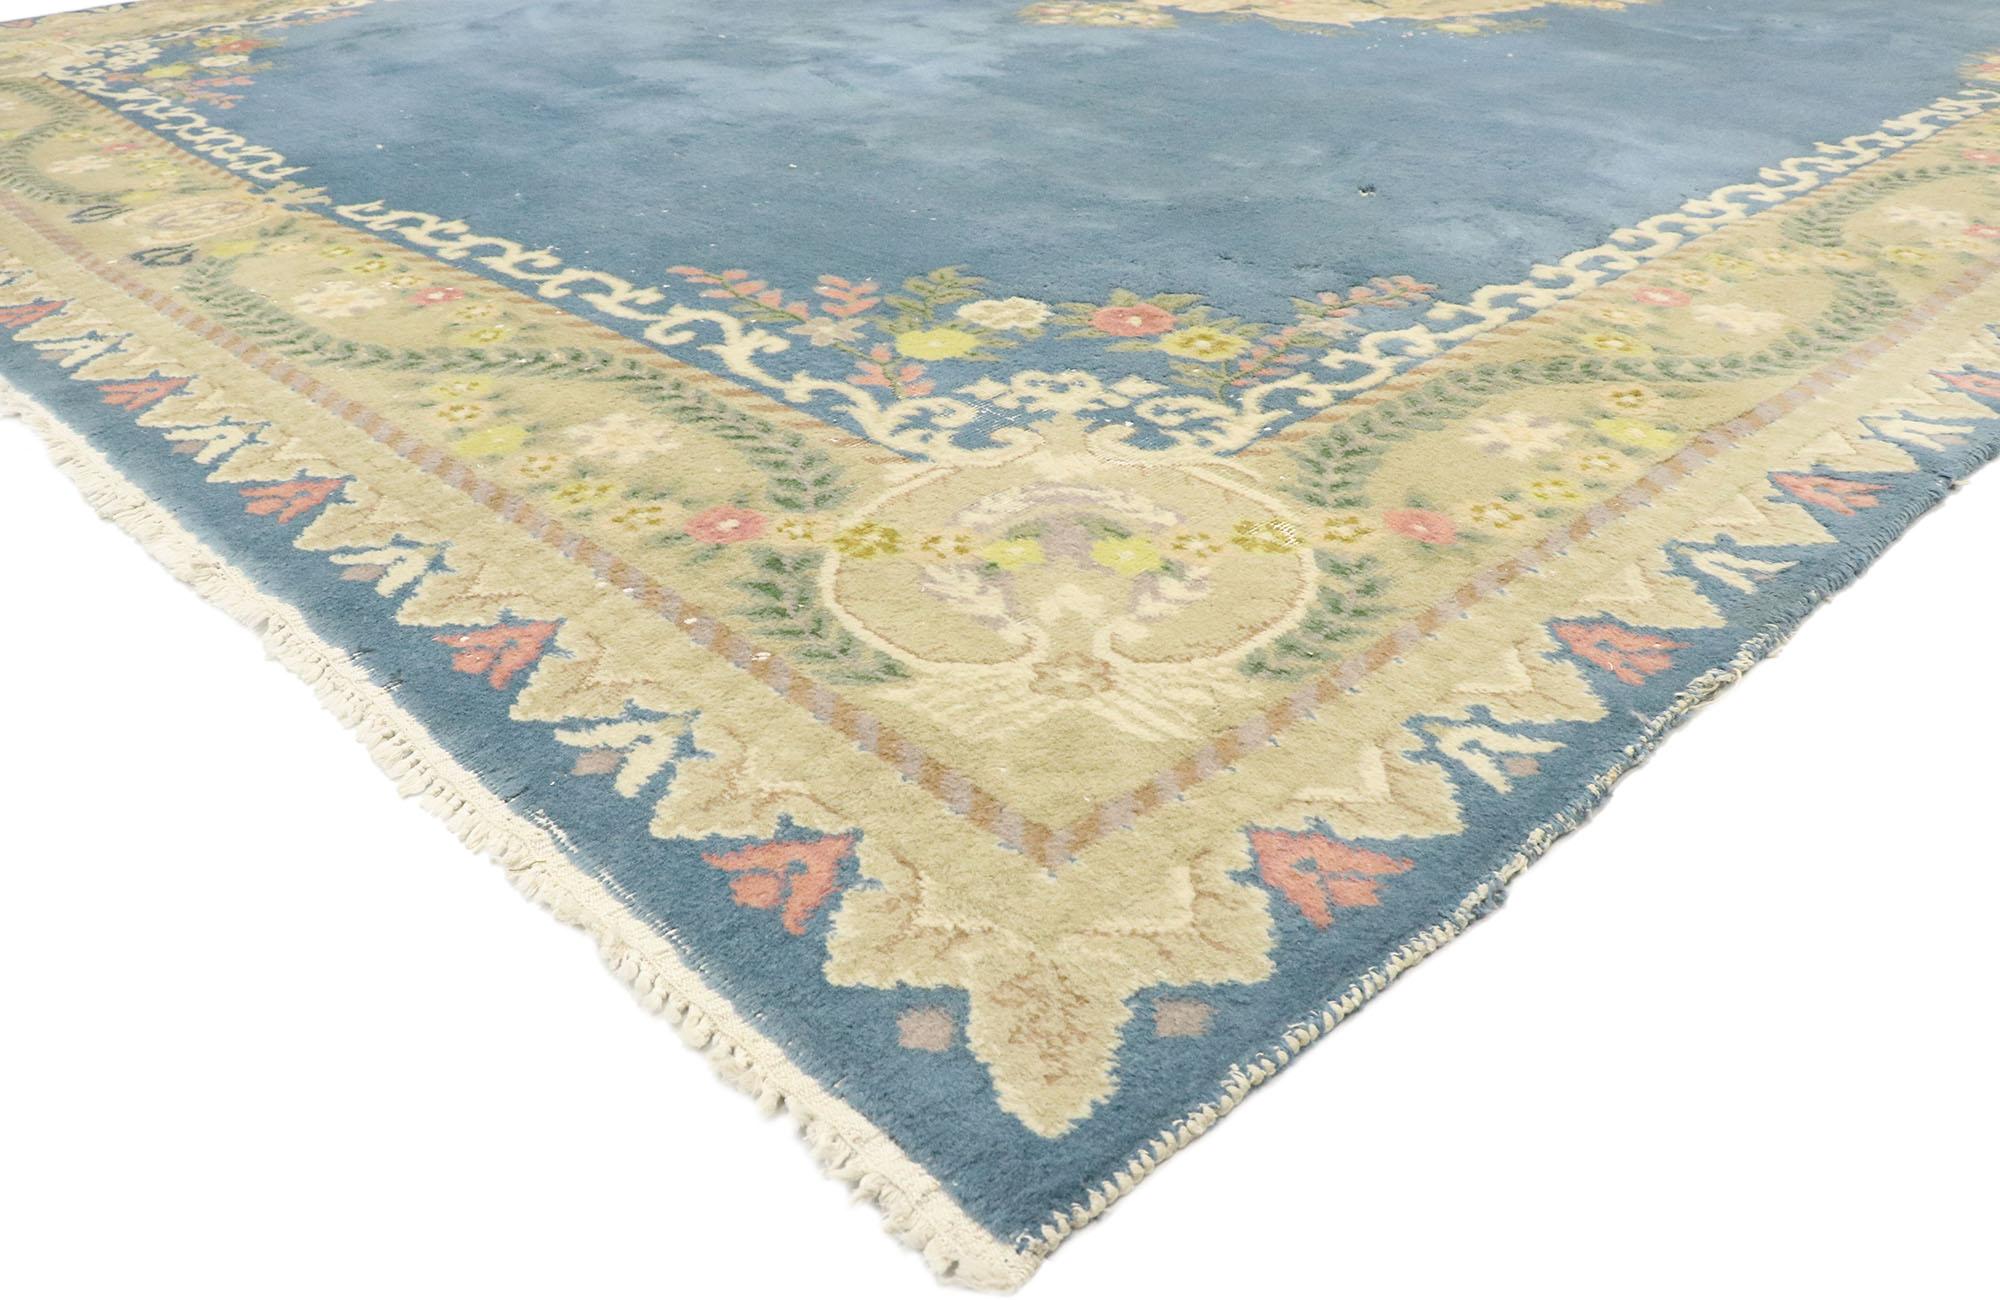 77509 Vintage Blue Floral Indian Rug, 11'09 x 17'10. Hand-knotted vintage Indian rugs are intricately crafted carpets made through a traditional weaving technique involving the tying of individual knots to create the rug's pile. These rugs are